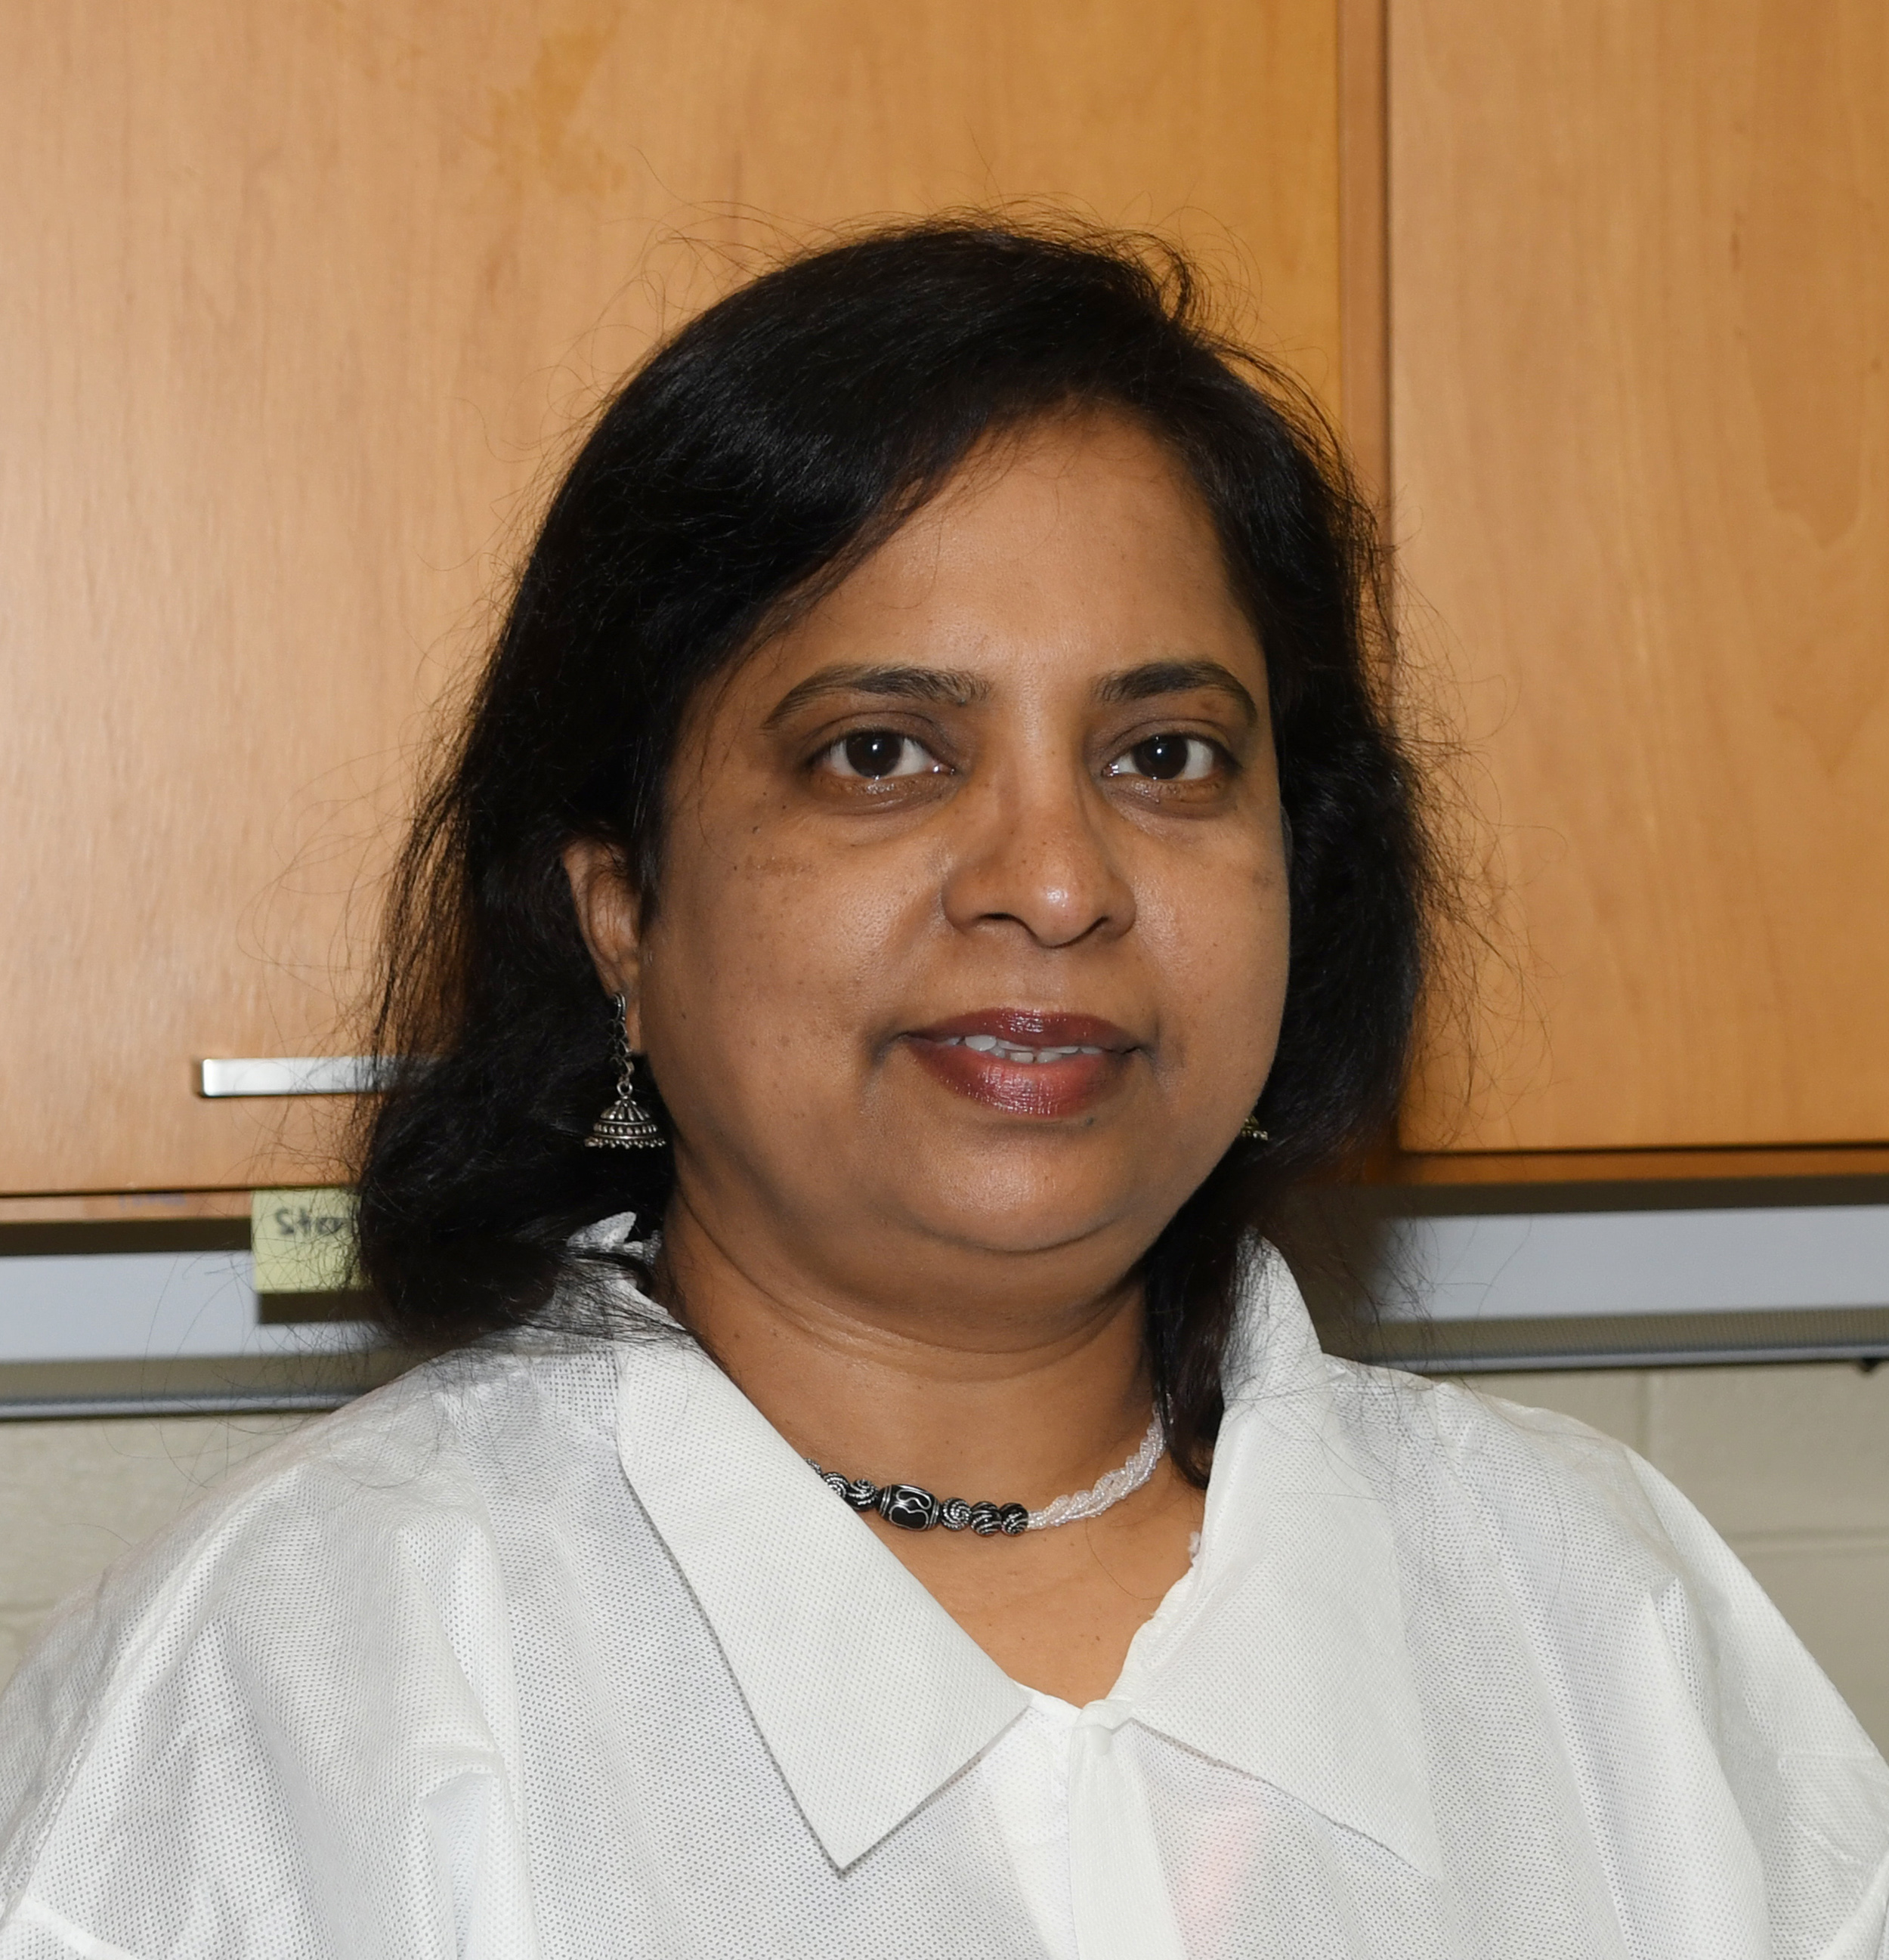 Dr. Kalpalatha Melmaiee served as a 2022 Fulbright Specialist in India.